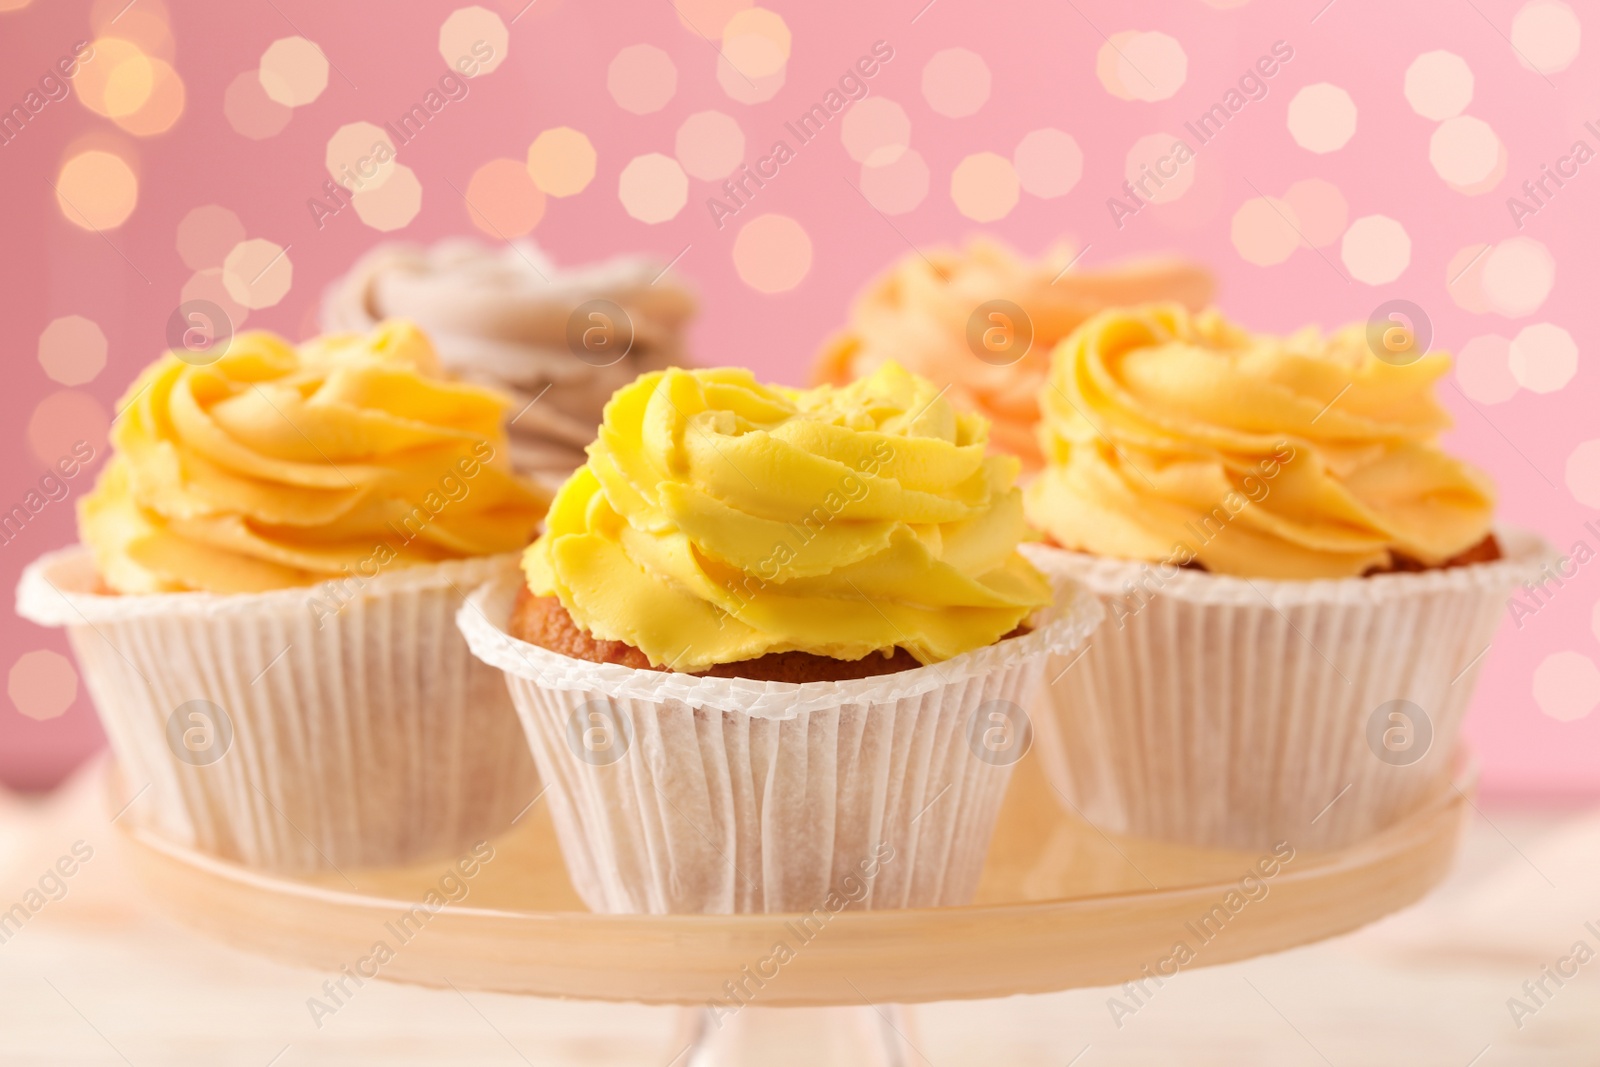 Photo of Stand with tasty cupcakes against blurred lights, closeup